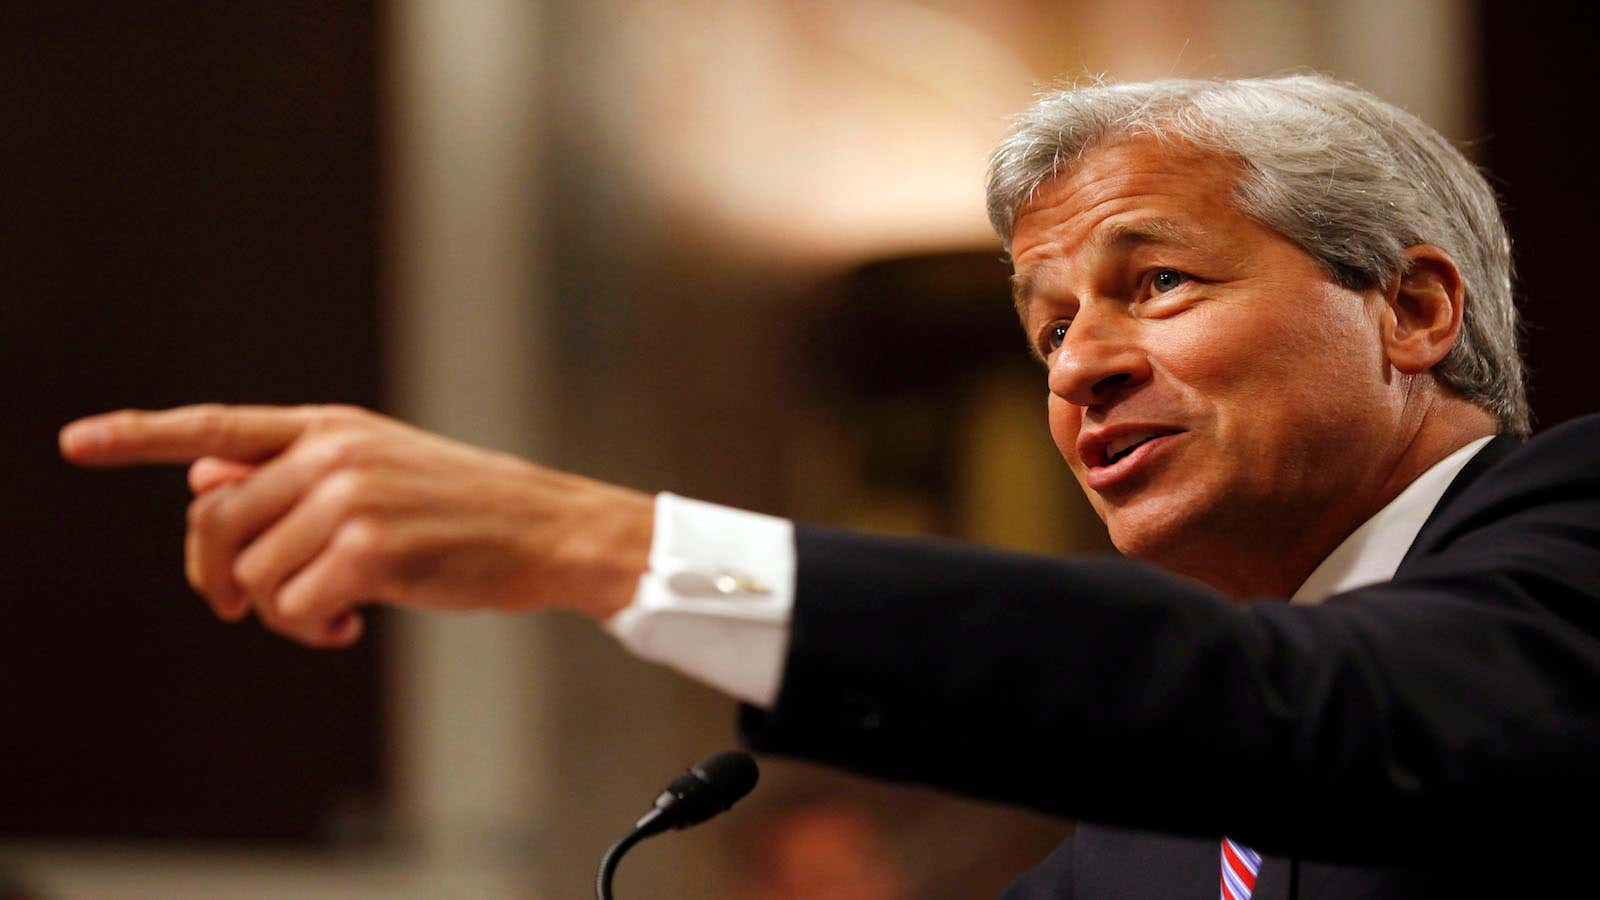 JPMorgan’s CEO wants to start protecting your financial data.